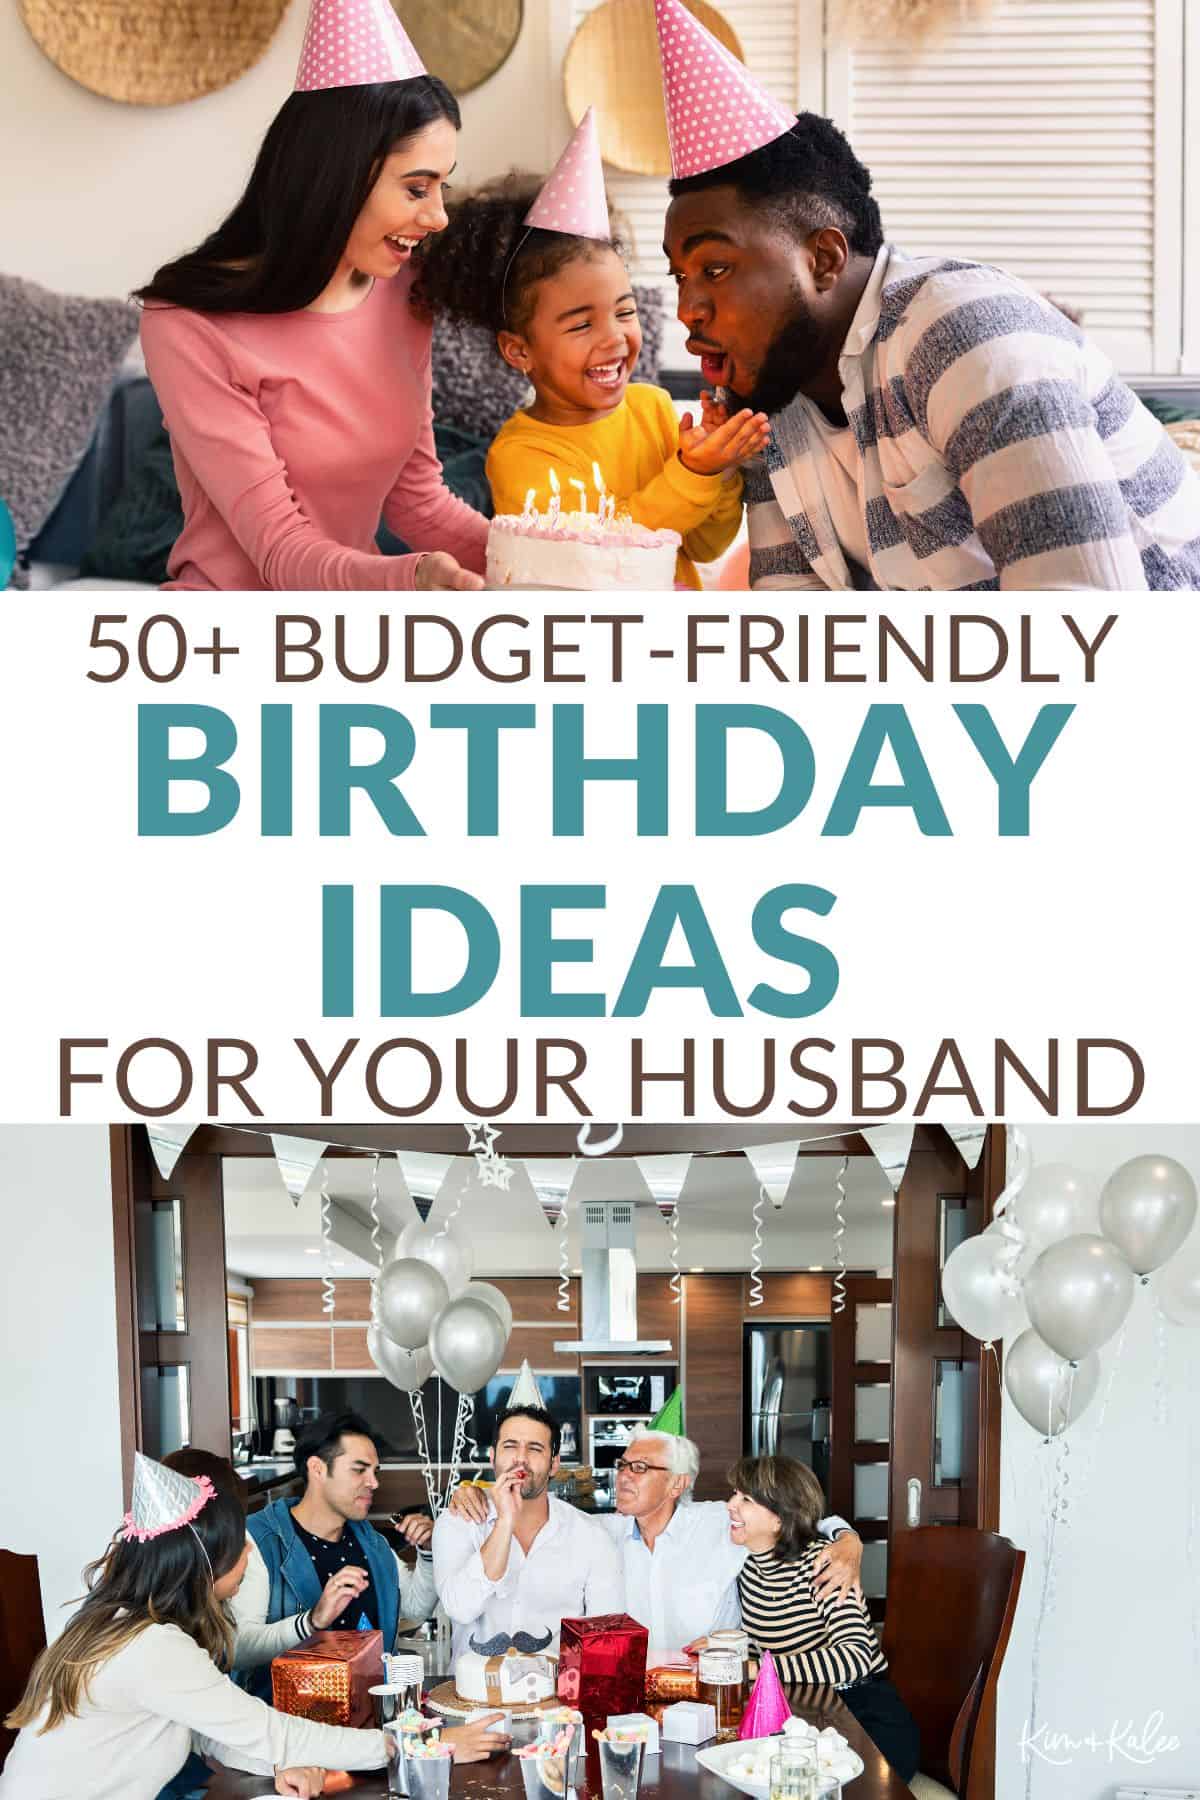 collage of two different men celebrating their birthdays with their families - text overlay says 50+ budget-friendly birthday ideas for your husband